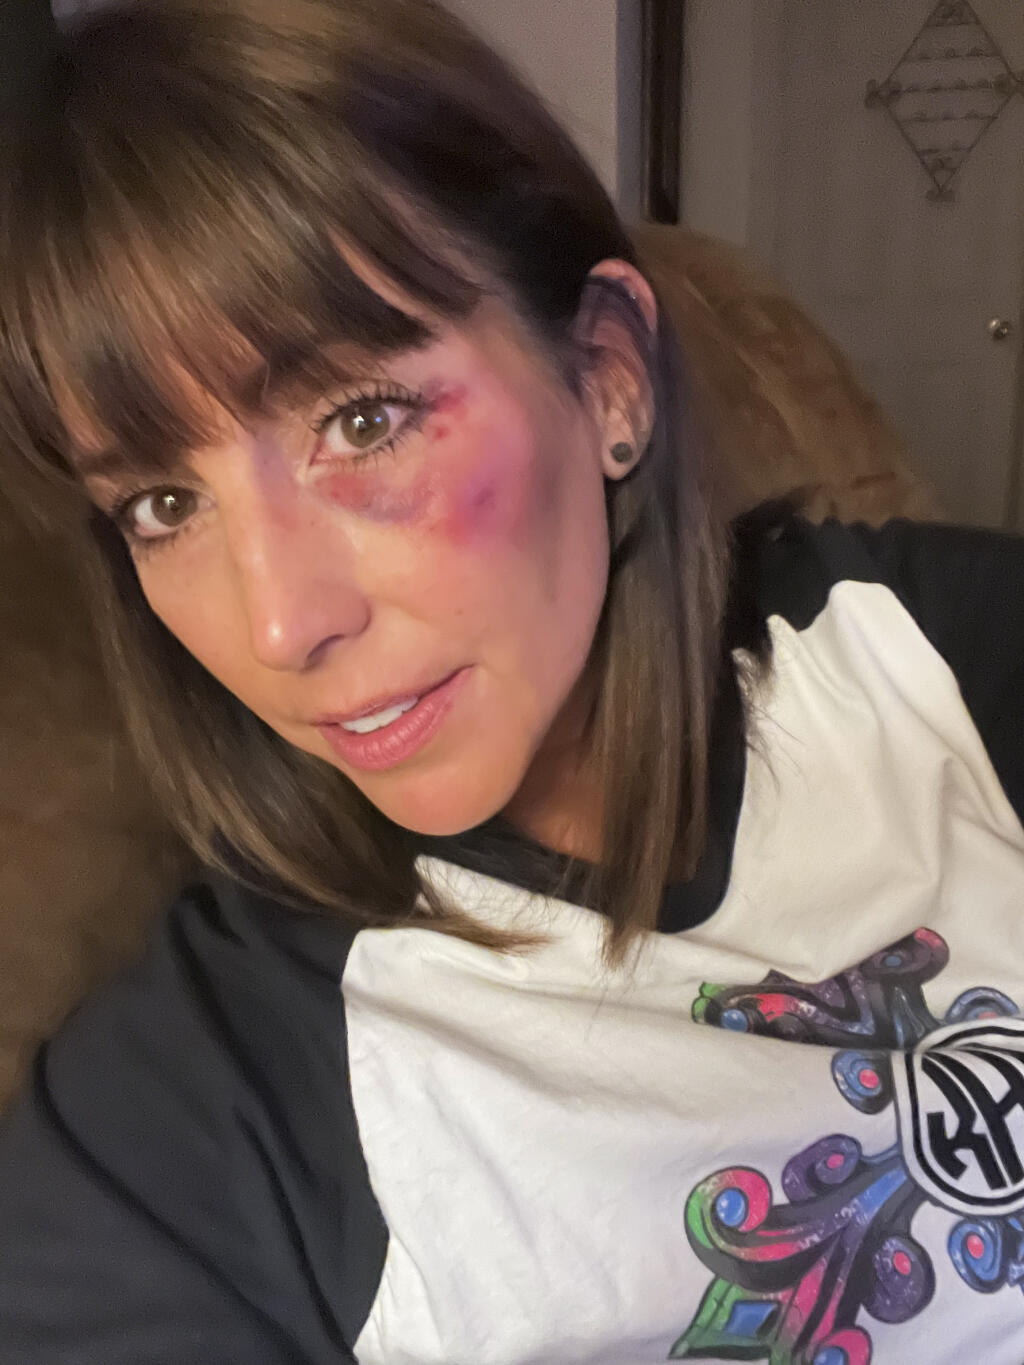 In this 2022 image released by Kristi Moore, Moore poses for a self portrait showing her bruised left eye, in Miss. On a play at second base, Moore called the runner safe. A woman watching the game thought the runner was out. She began screaming profanities, according to Moore. "I was maybe three steps off the field and she was there," Moore recalled. "And that's when she punched me." The woman was arrested and charged with simple assault. (Kristi Moore via AP)